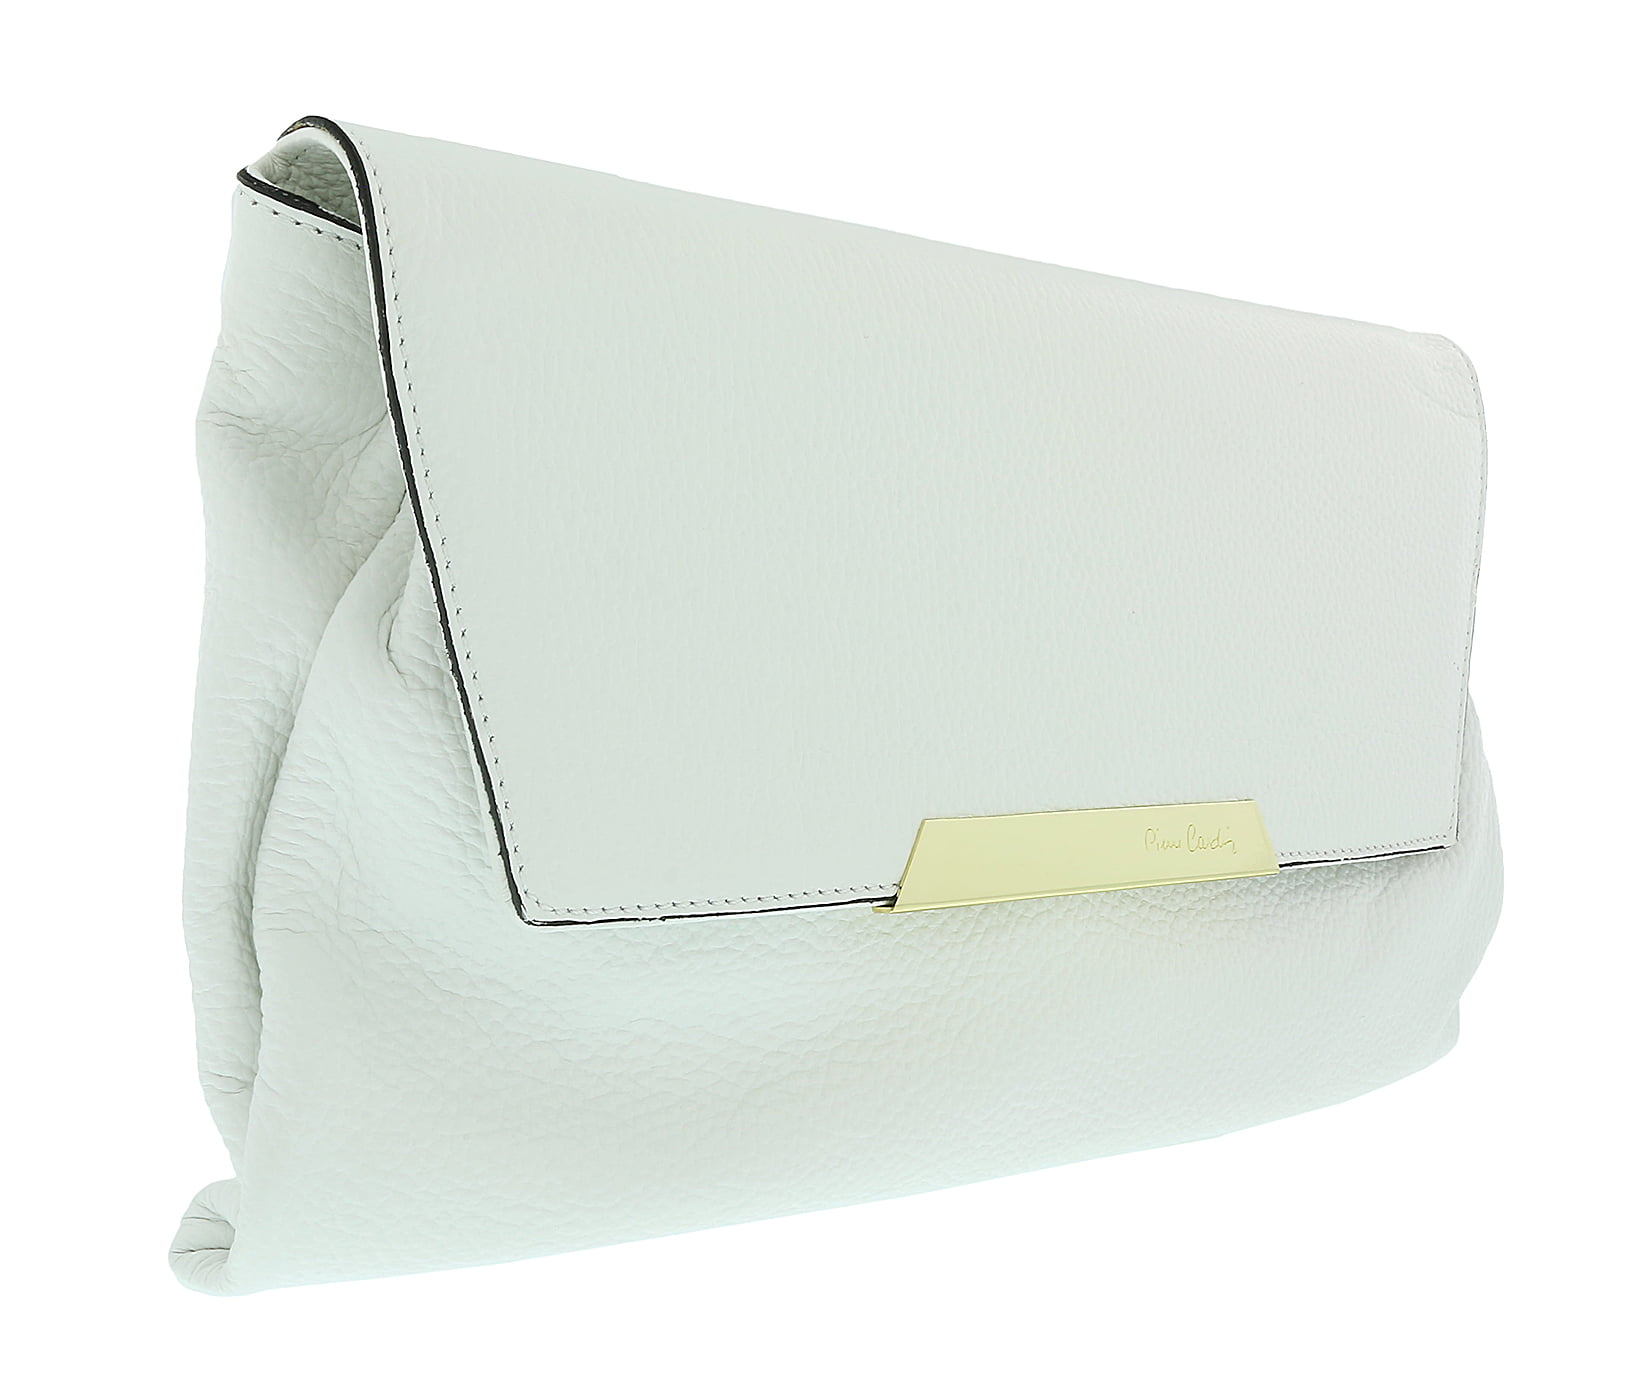 Pierre Cardin White Leather Small Slouchy Fashion Clutch for womens